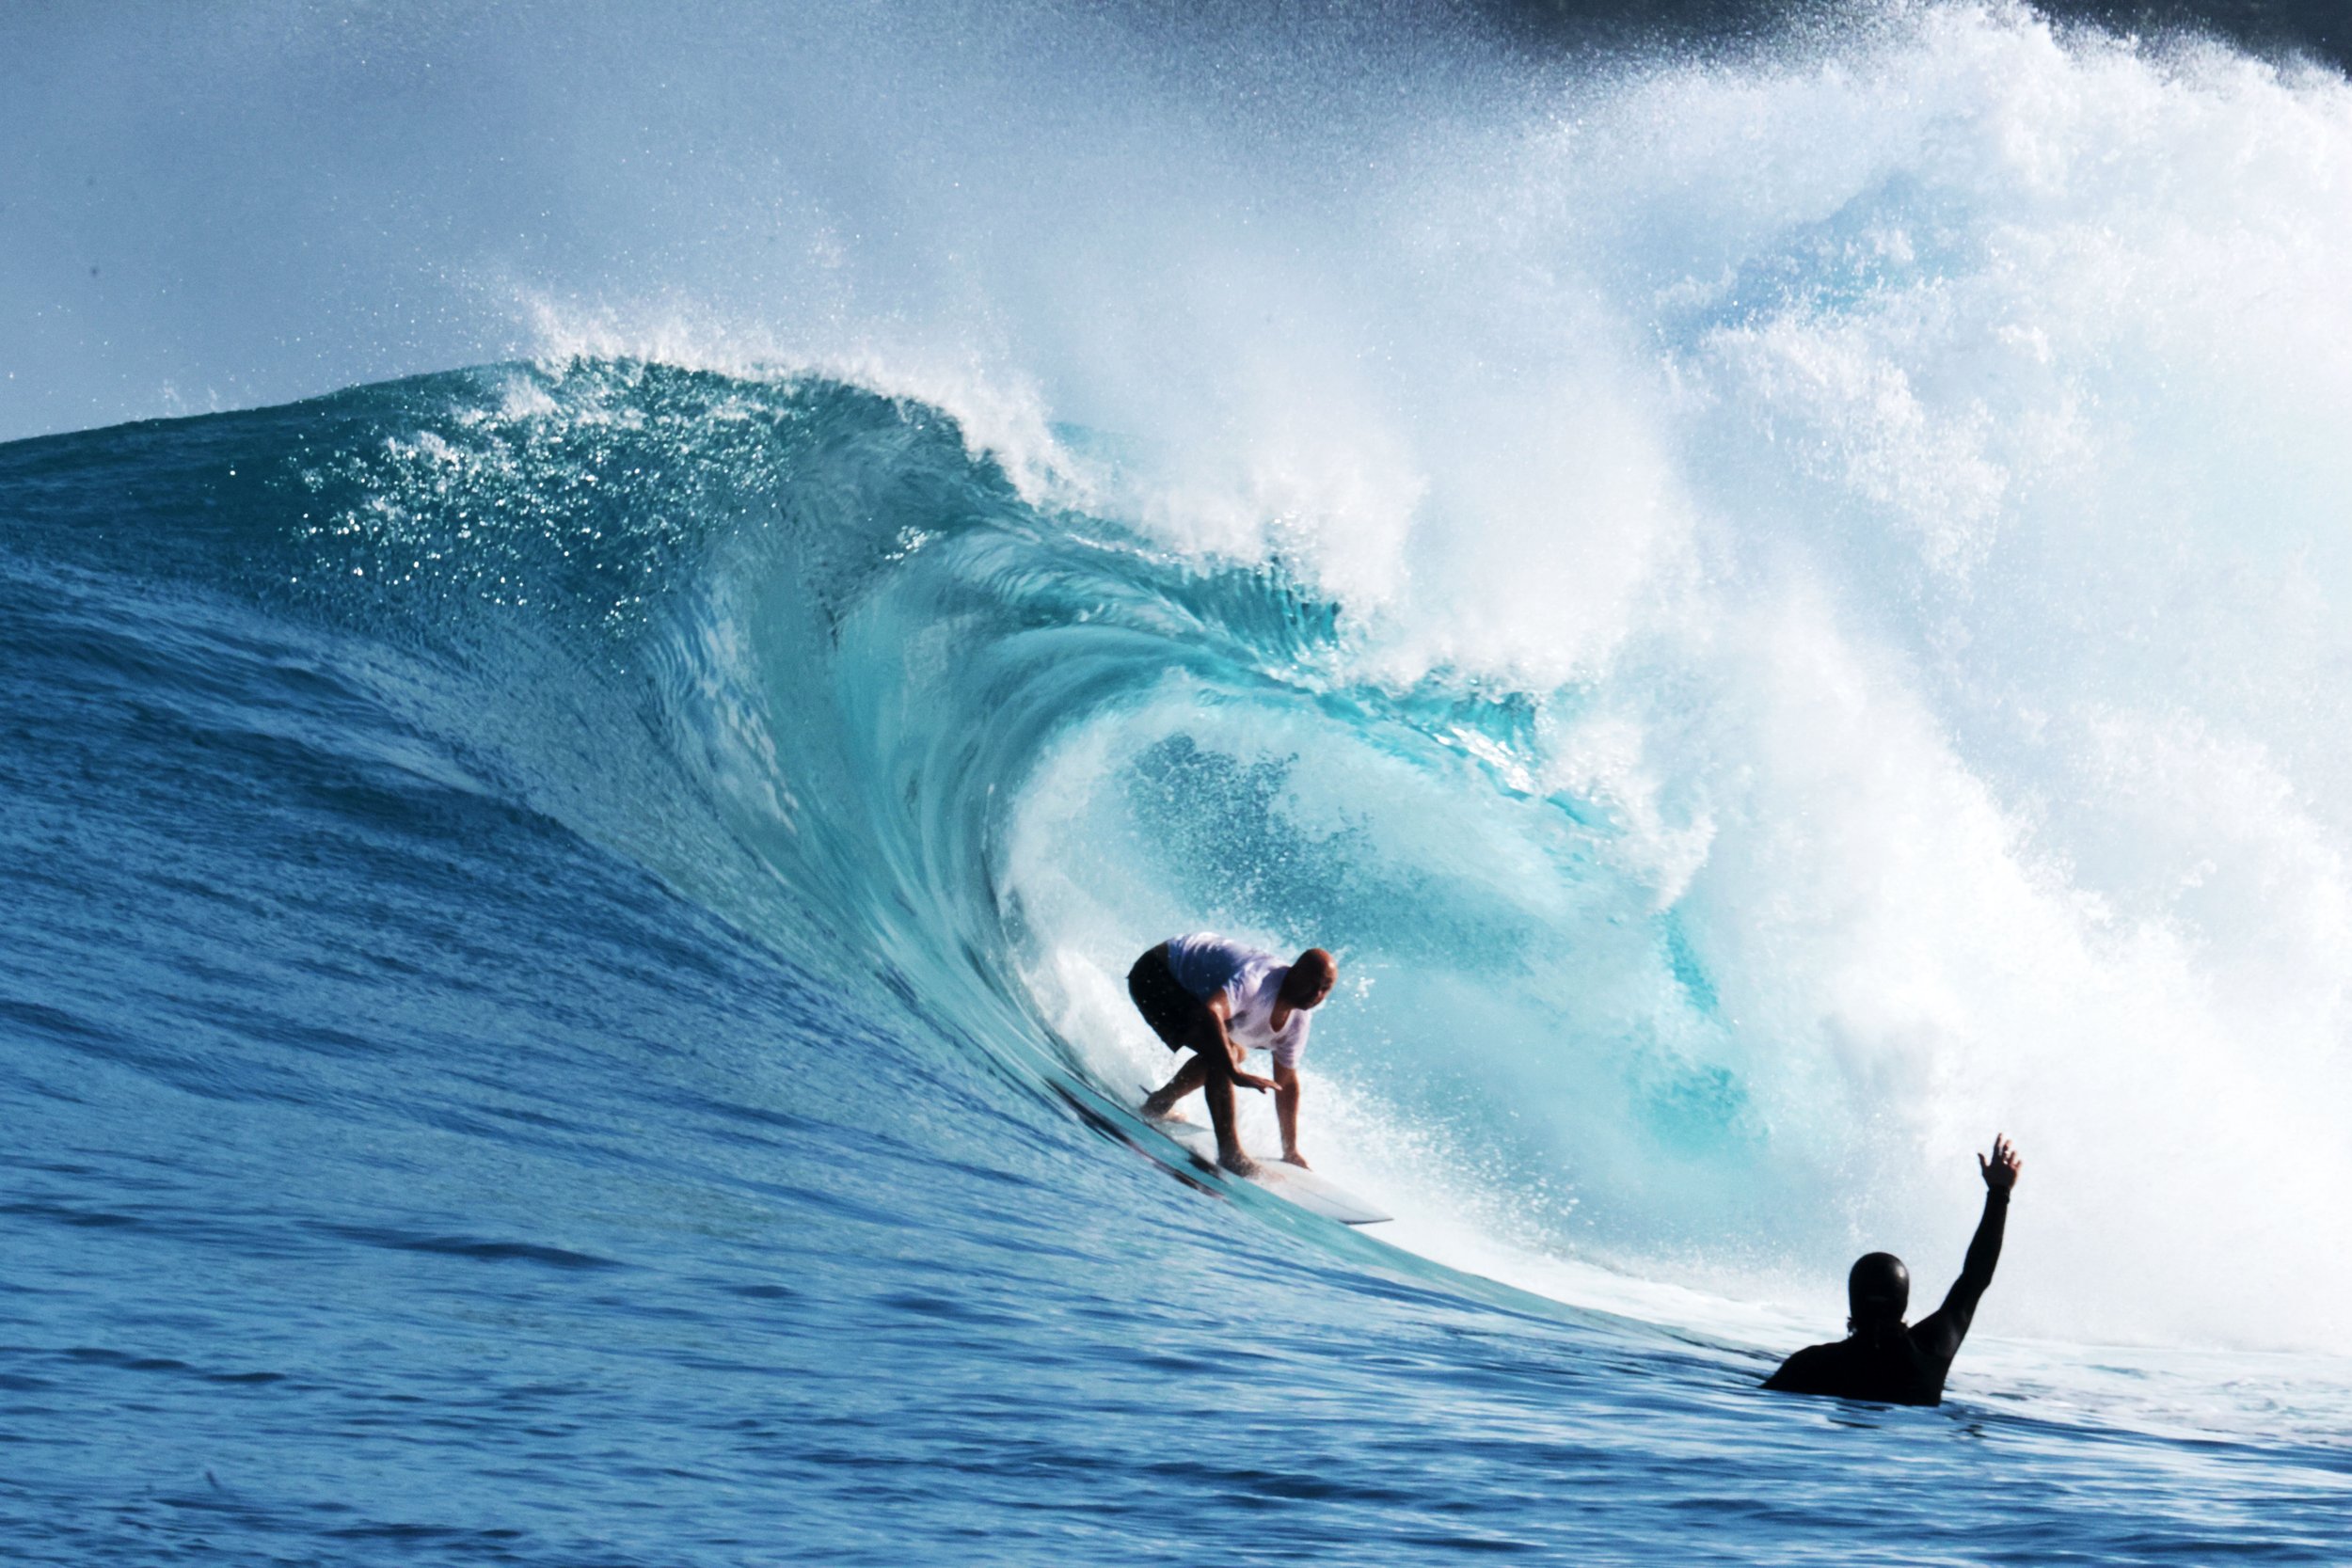 Surfing with just your mates is pretty unbeatable.